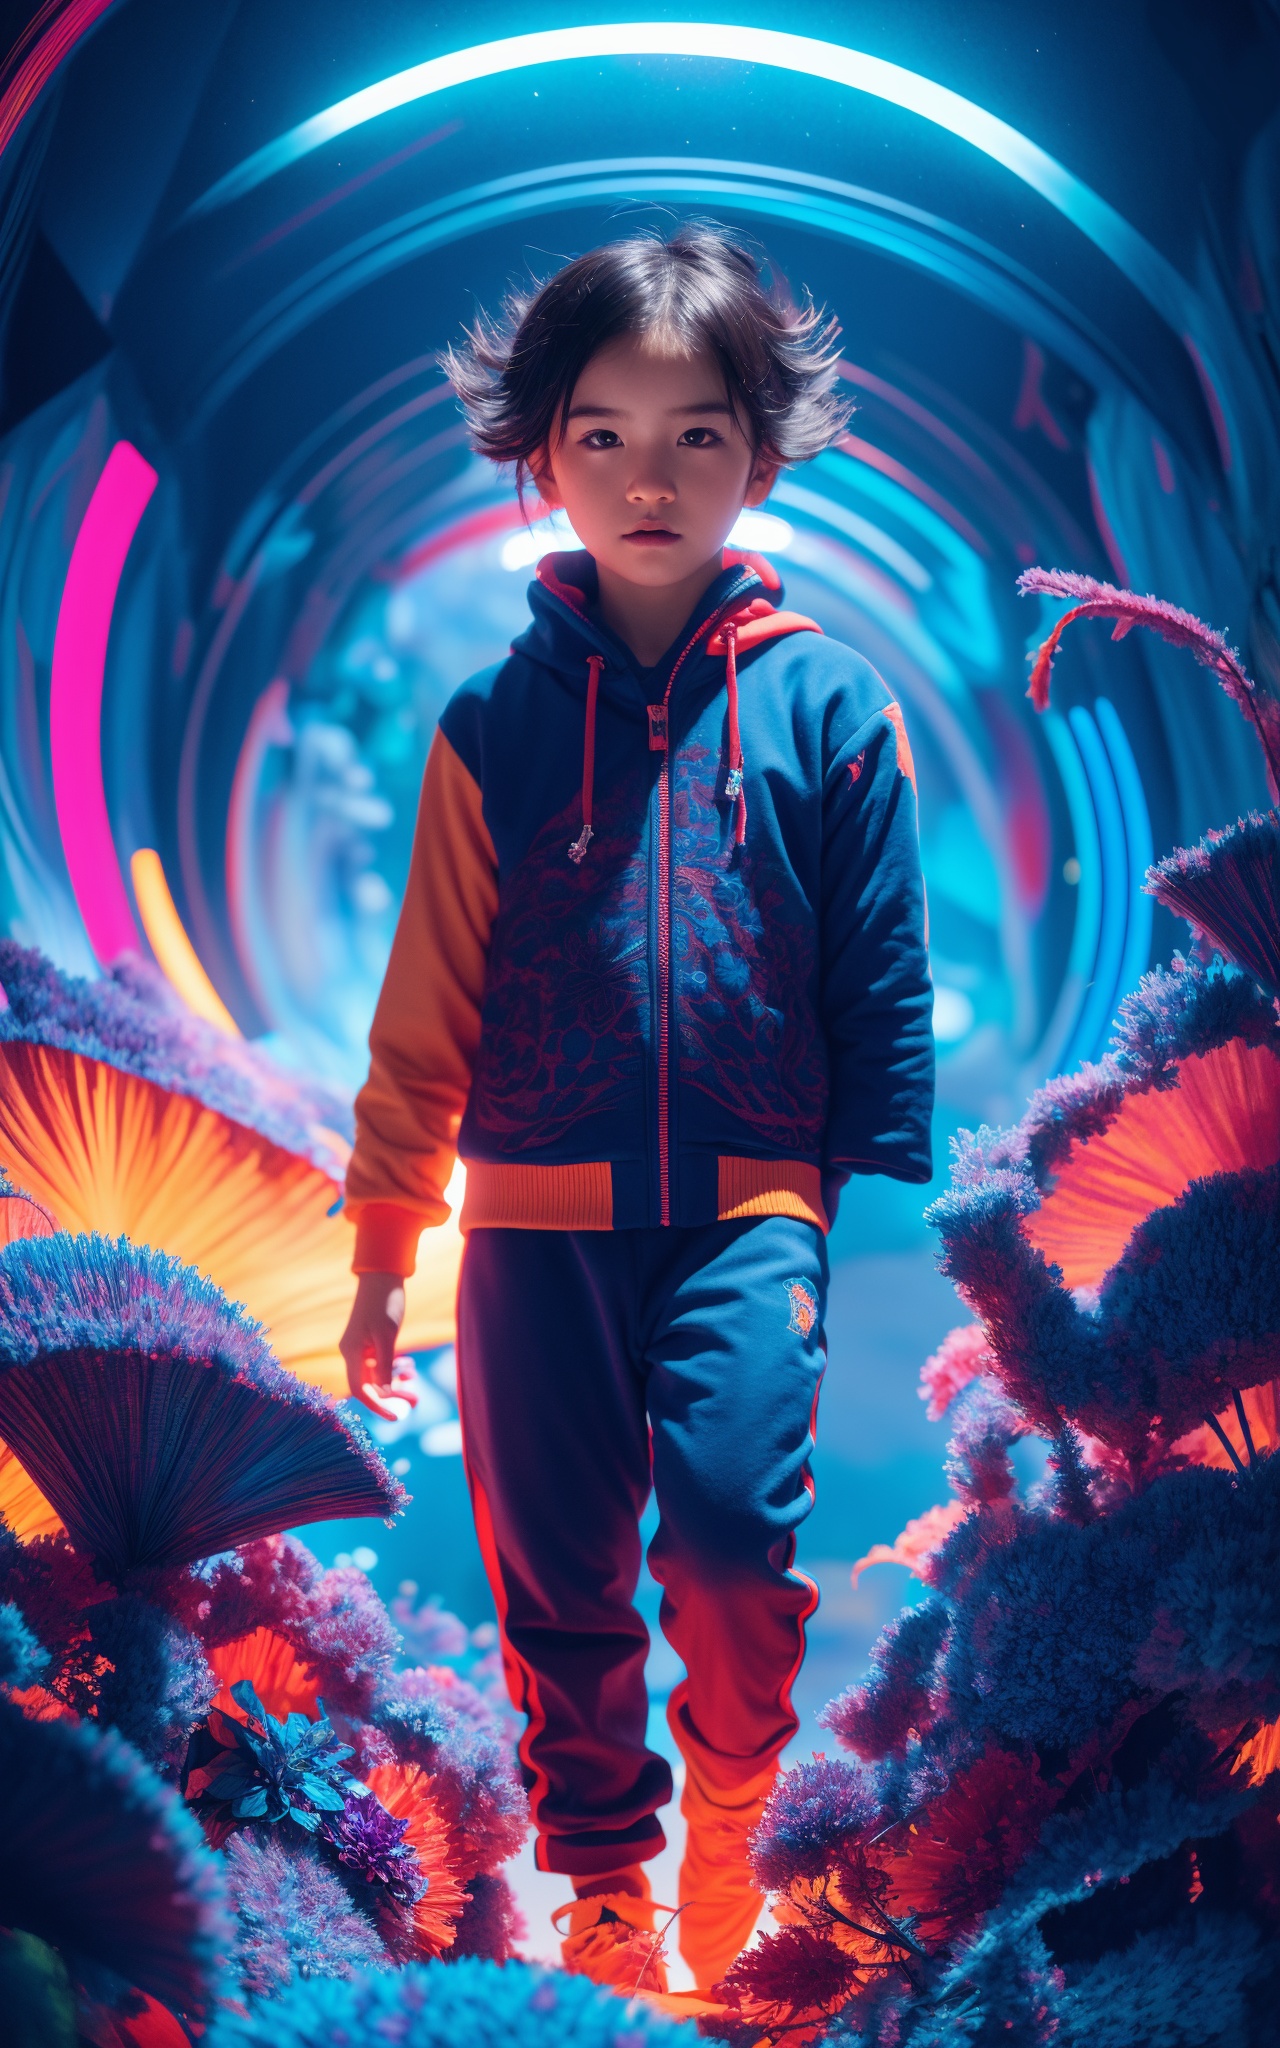 (masterpiece, top quality, best quality, official art, beautiful and aesthetic:1.2) ,cover art,illustration minimalism, Gel lighting, hyperdetailed, Cutester Art, DayGlo blue color grading, rainbow swirl, waning light, High quality, rendered in autodesk 3ds max, Westernpunk, Single Color, arcane, Unsplash, (Newt:1.3) Running in a Laguna, it is Psychedelic Art, Colorful, opulent, electric blue palette, specular lighting, behance HD, Glitchcore, Cold Colors,"I'm just a kid and life is a nightmare.", Sosaku Hanga, Gradient and Crimson fractal art, geometric patterns, Anne Stokes, Cartelcore, Warm lighting